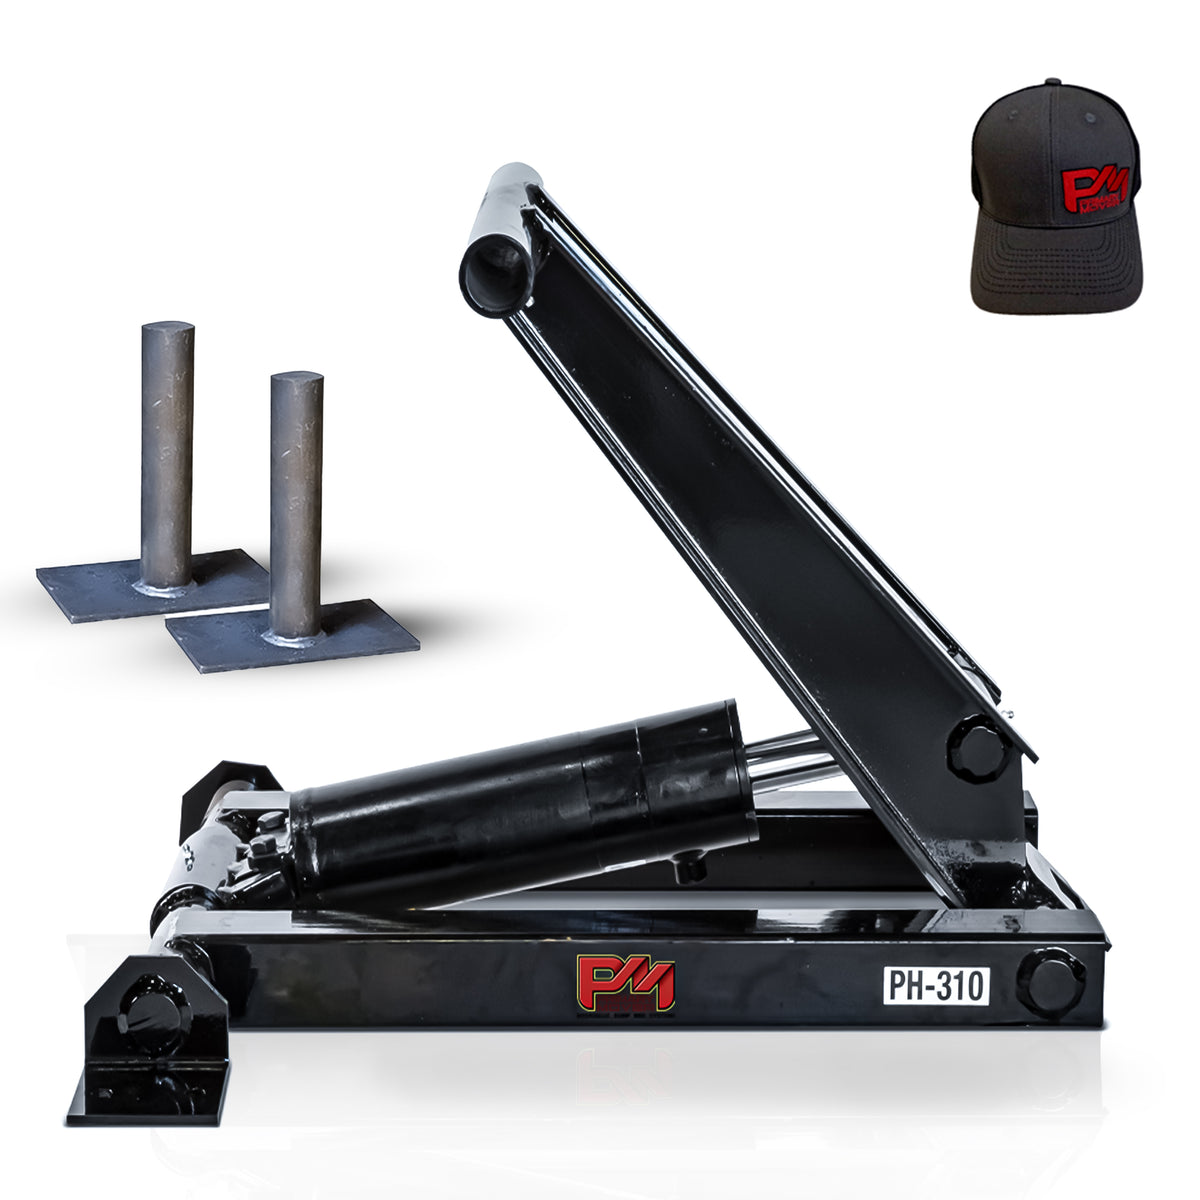 Hydraulic Scissor Hoist Kit - 3 Ton Capacity - Fits 8-10' Dump Body | PF-310: Black metal object with cap, red and black logo, close-up of logo, and metal poles. Includes cylinder, mounting brackets, hydraulic pump, and more.